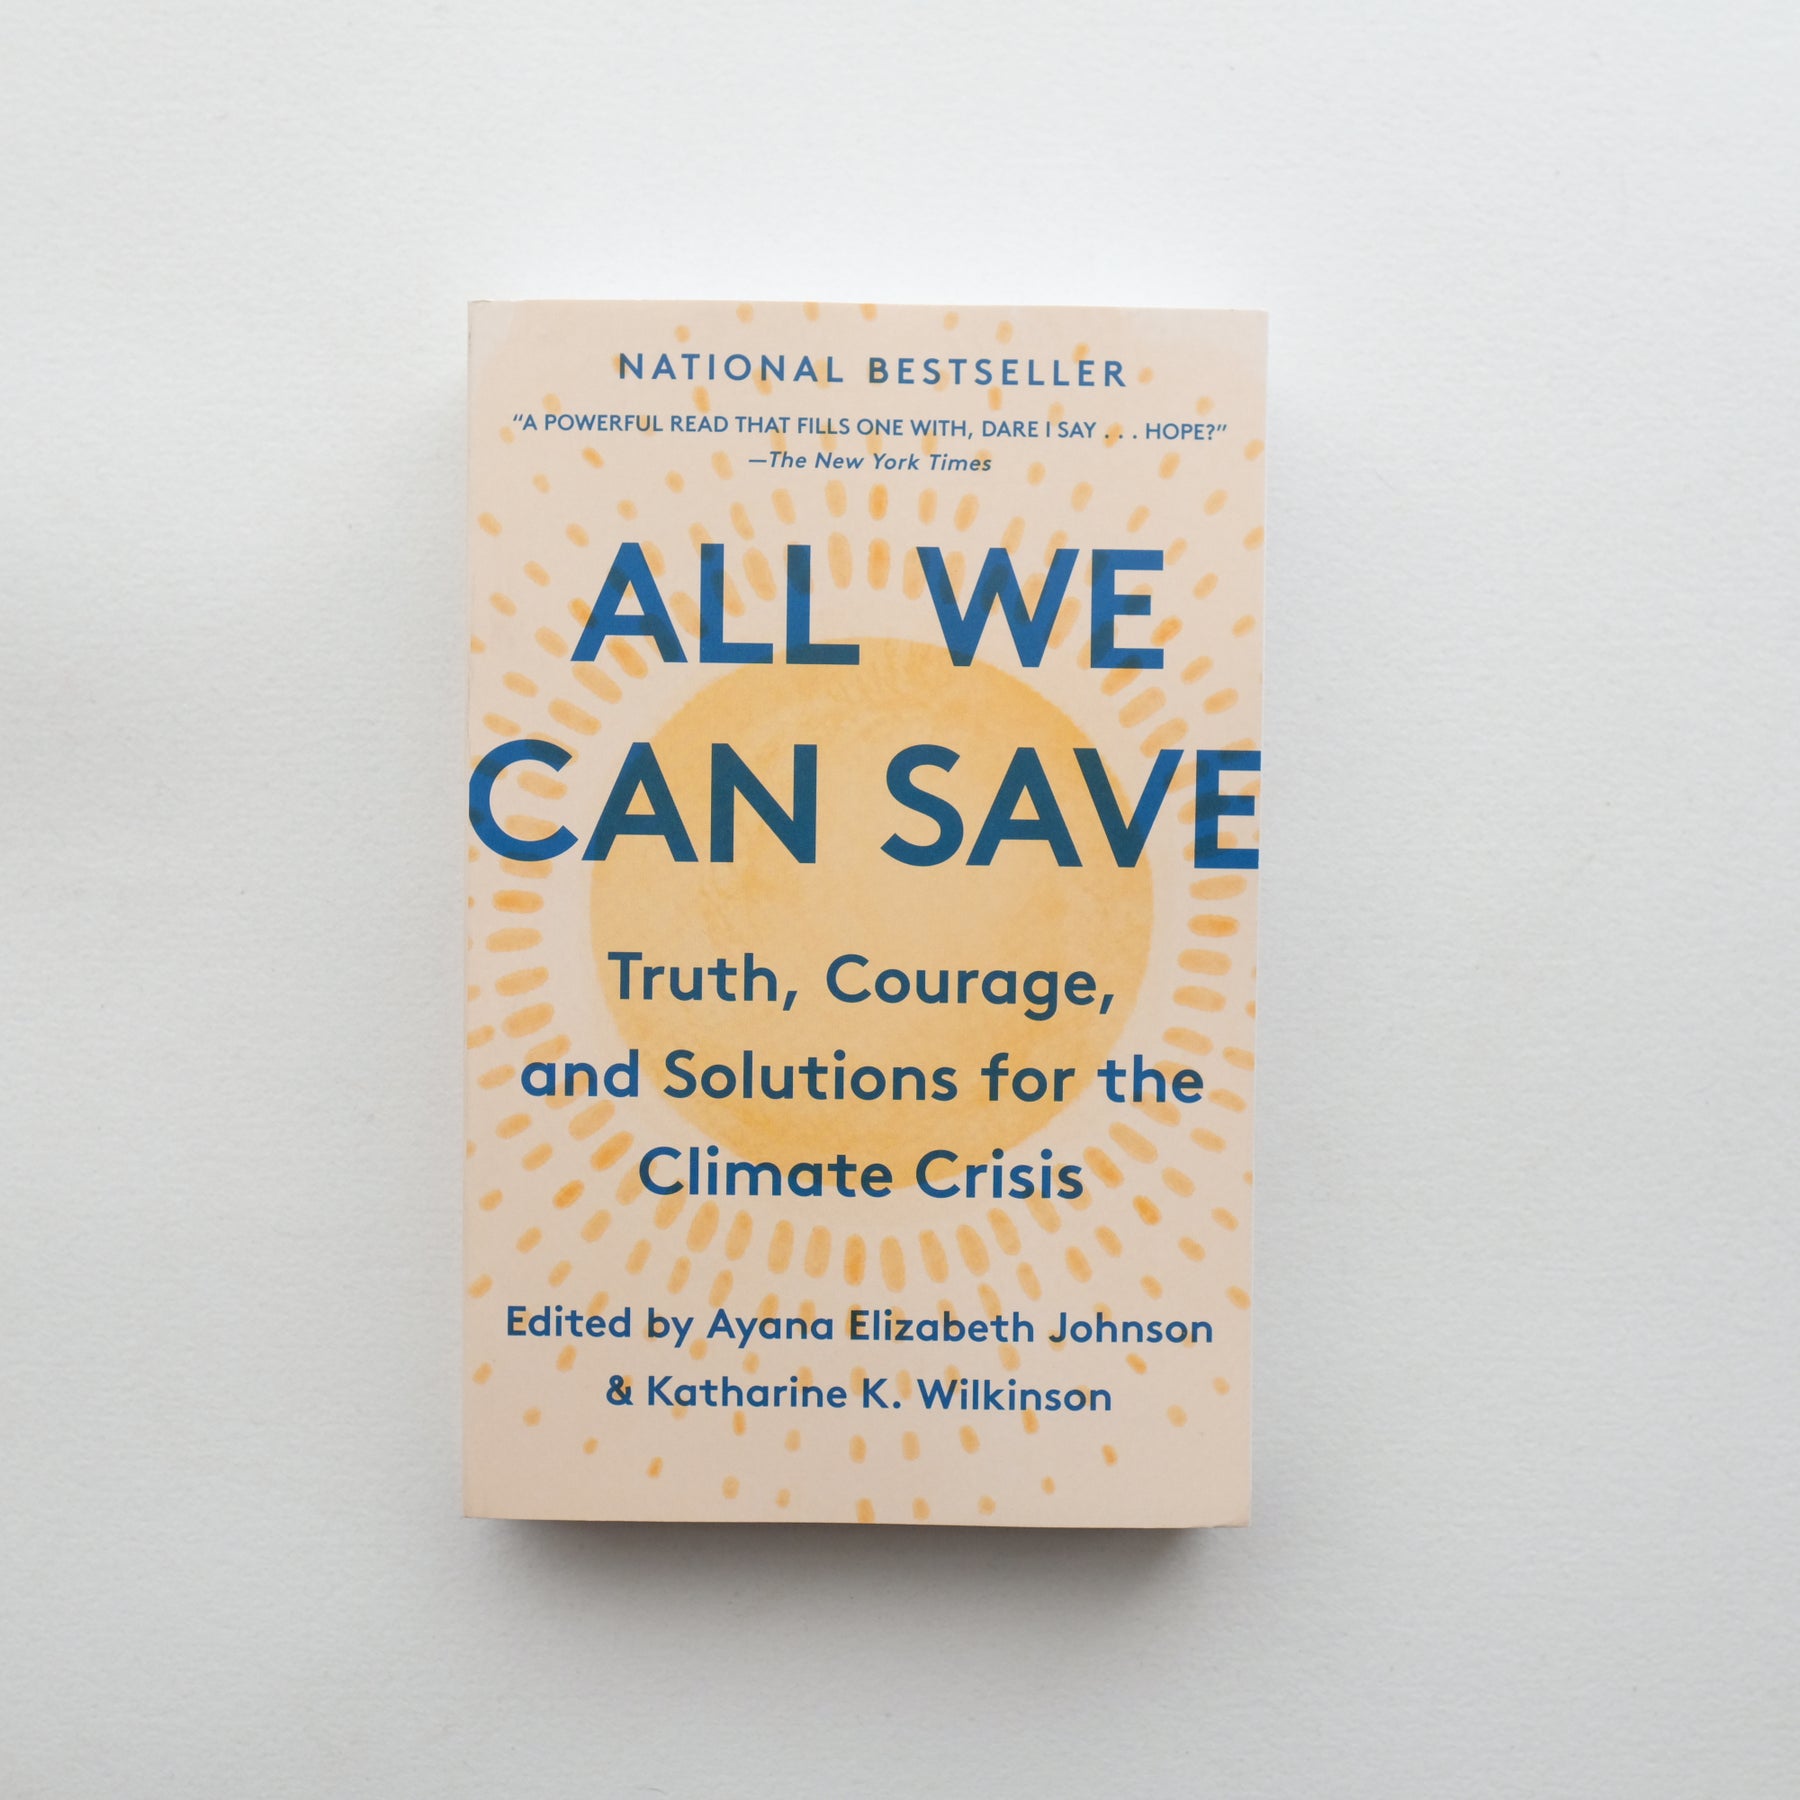 All We Can Save: Truth, Courage, and Solutions for the Climate Crisis, Edited by Ayana Elizabeth Johnson & Katherine K. Wilkinson